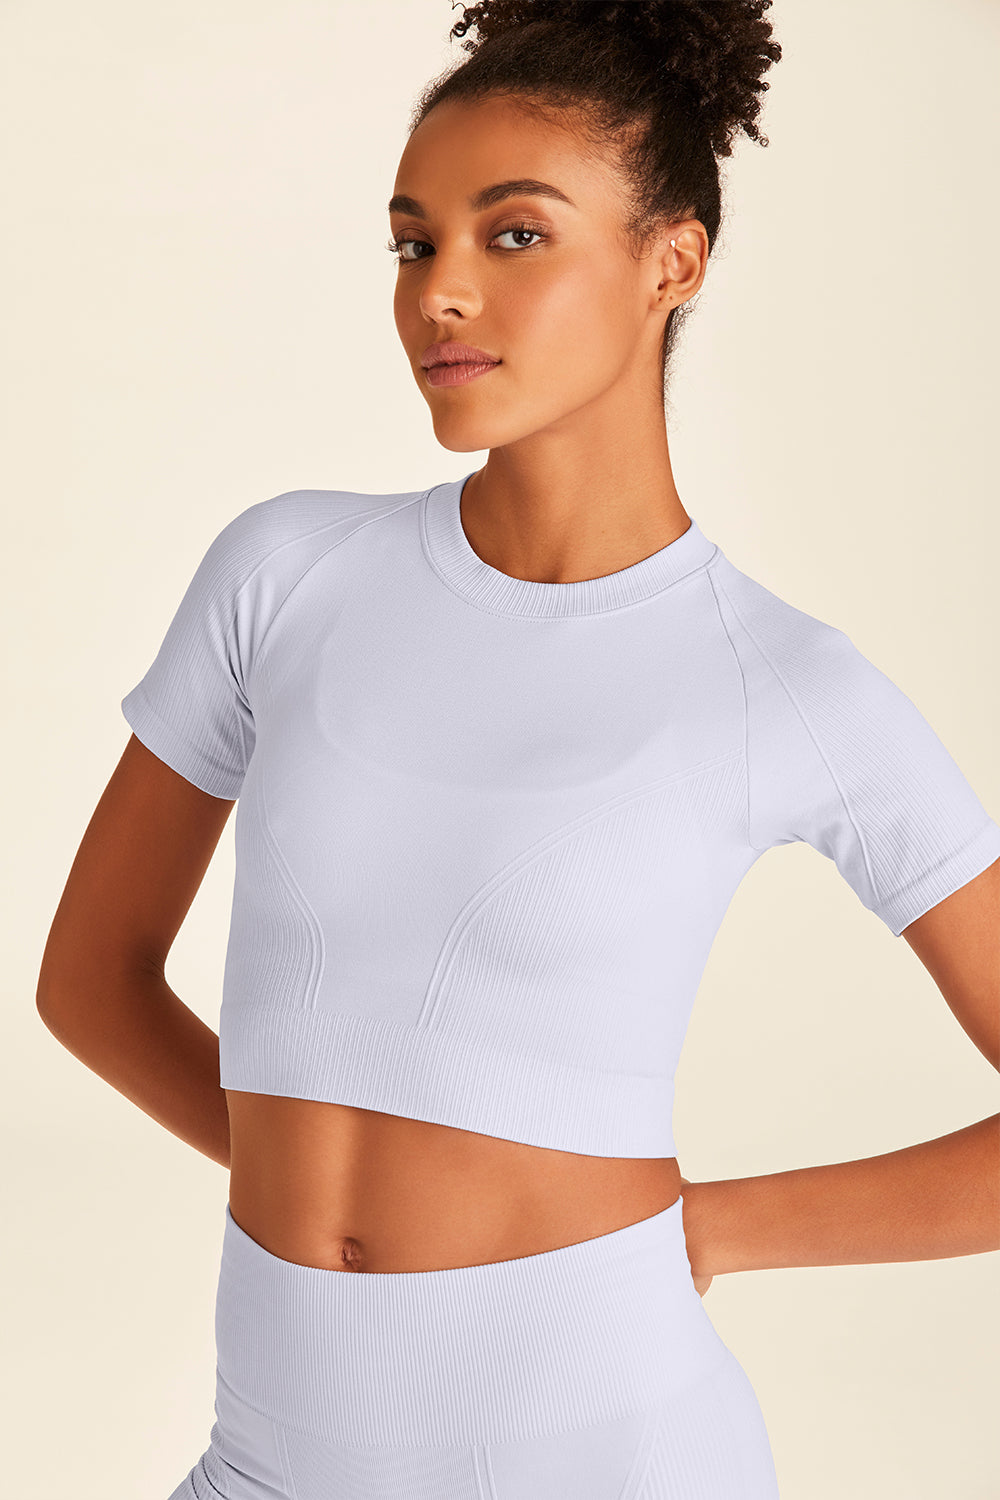 Alala Barre Seamless Tee in baby blue for women